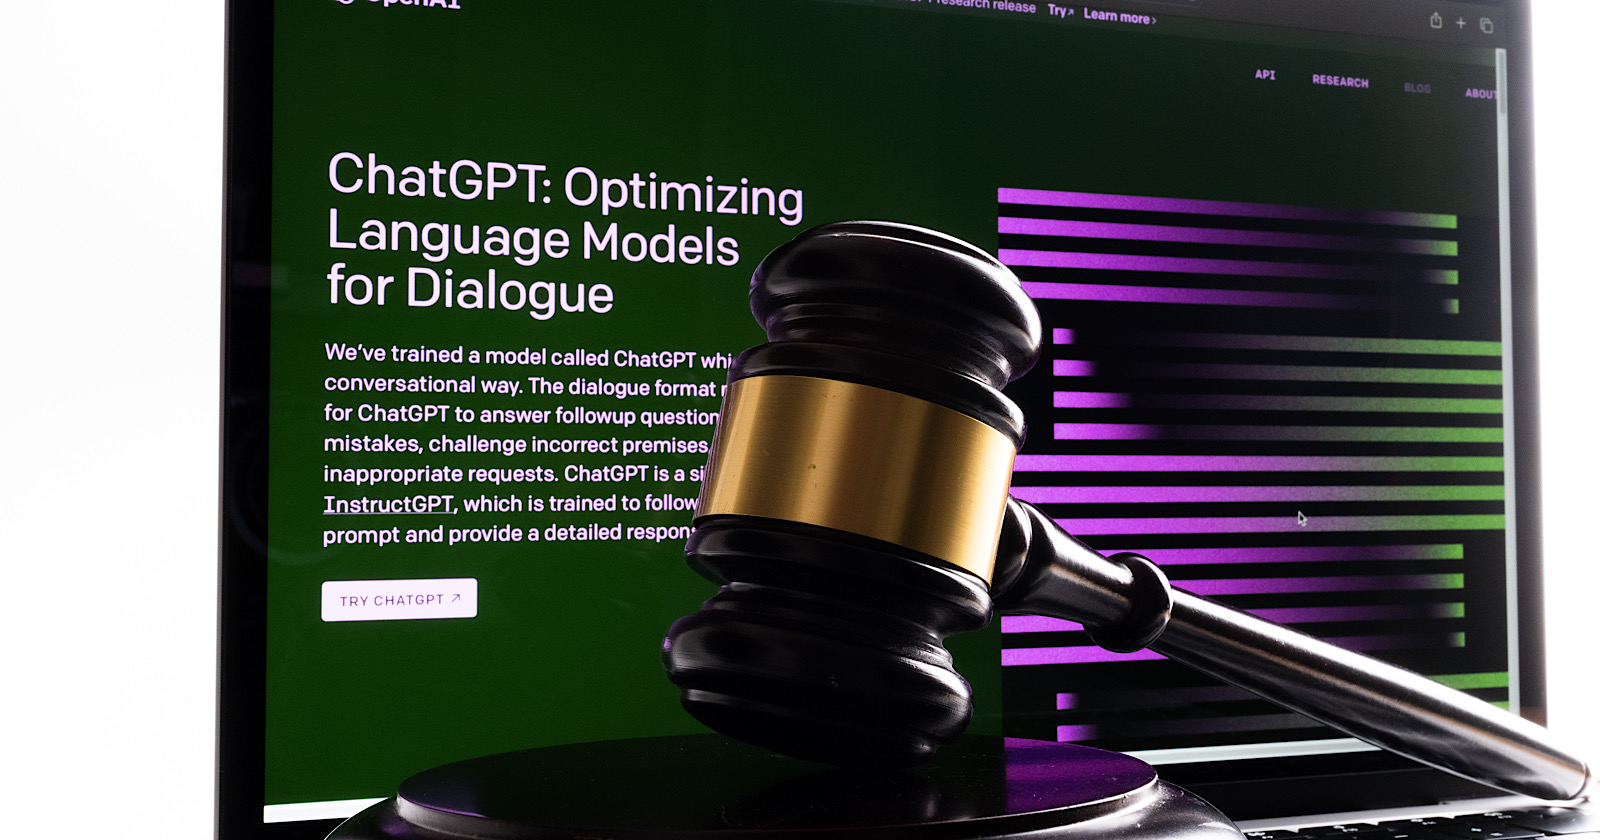 ChatGPT Creator Faces Multiple Lawsuits Over Copyright & Privacy Violations via @sejournal, @MattGSouthern